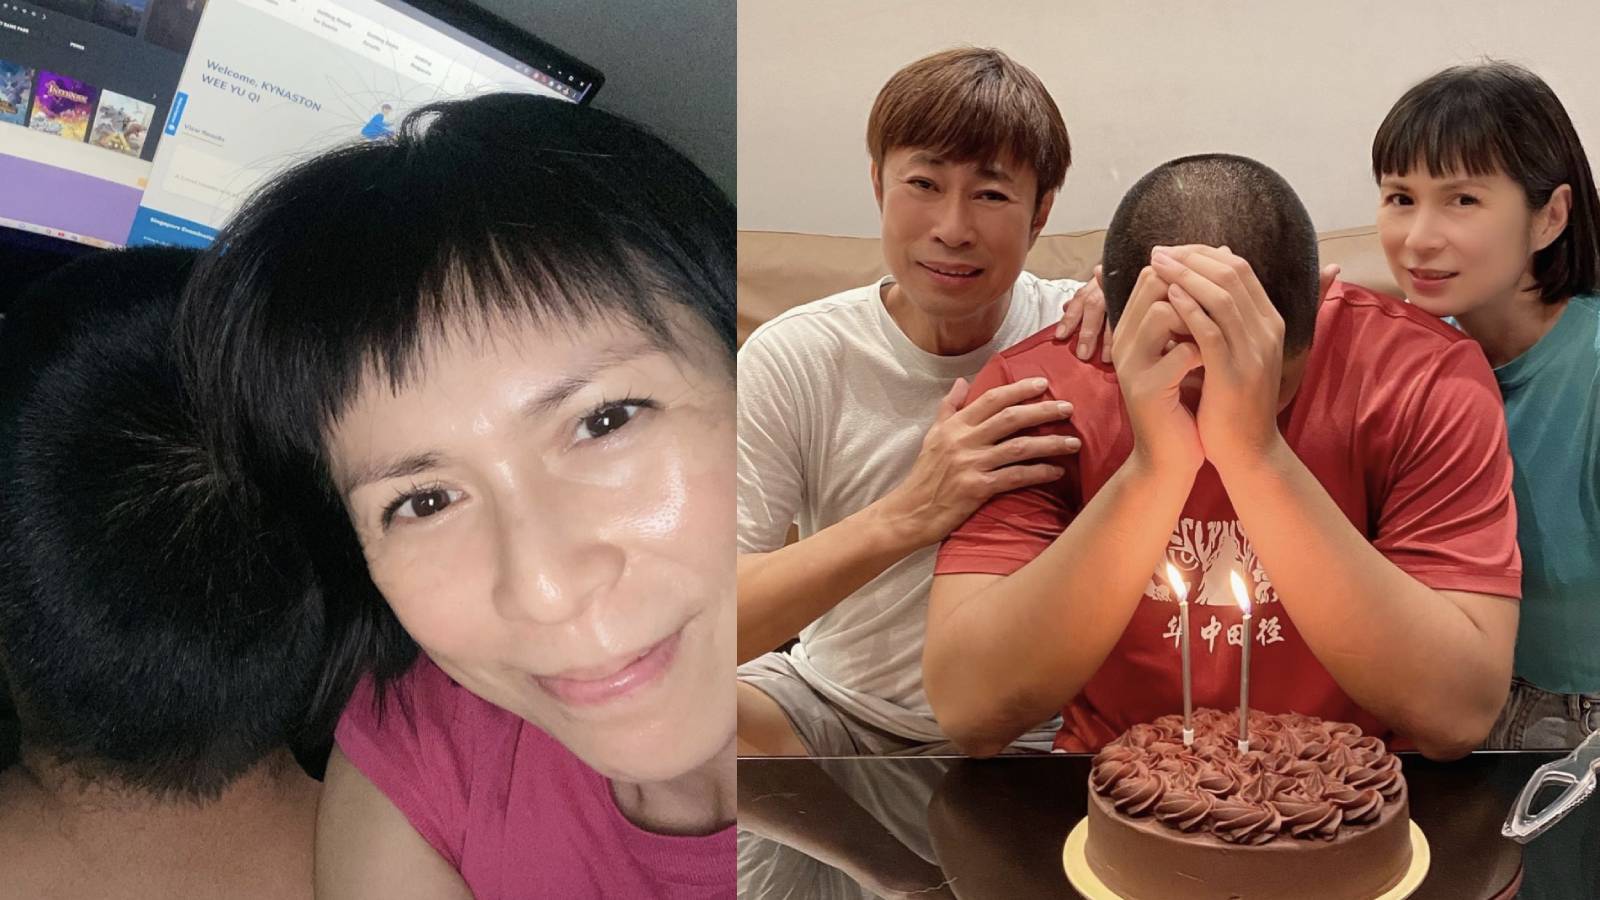 Pan Lingling Says She Can “Finally Step Down” As Her Younger Son’s Chauffeur After He Does Well For His A-Levels